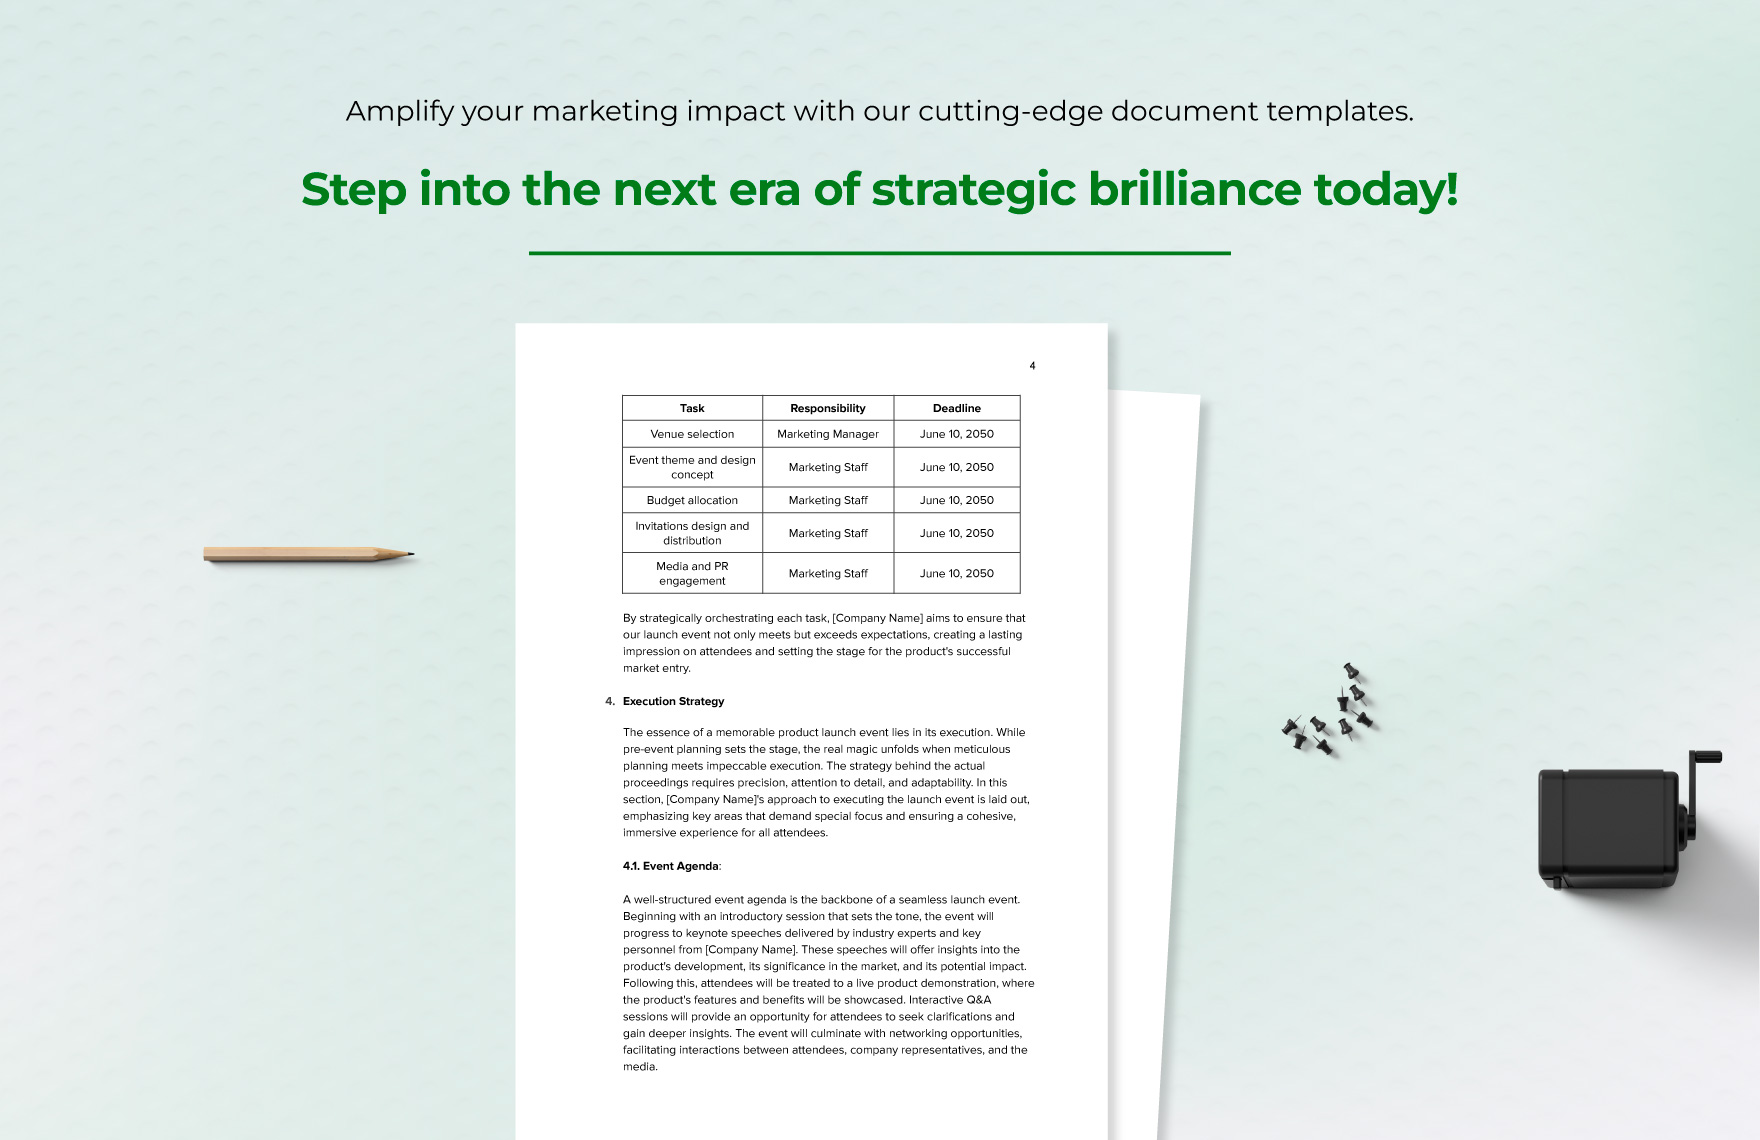 Marketing Protocol for Launch Event Management Template